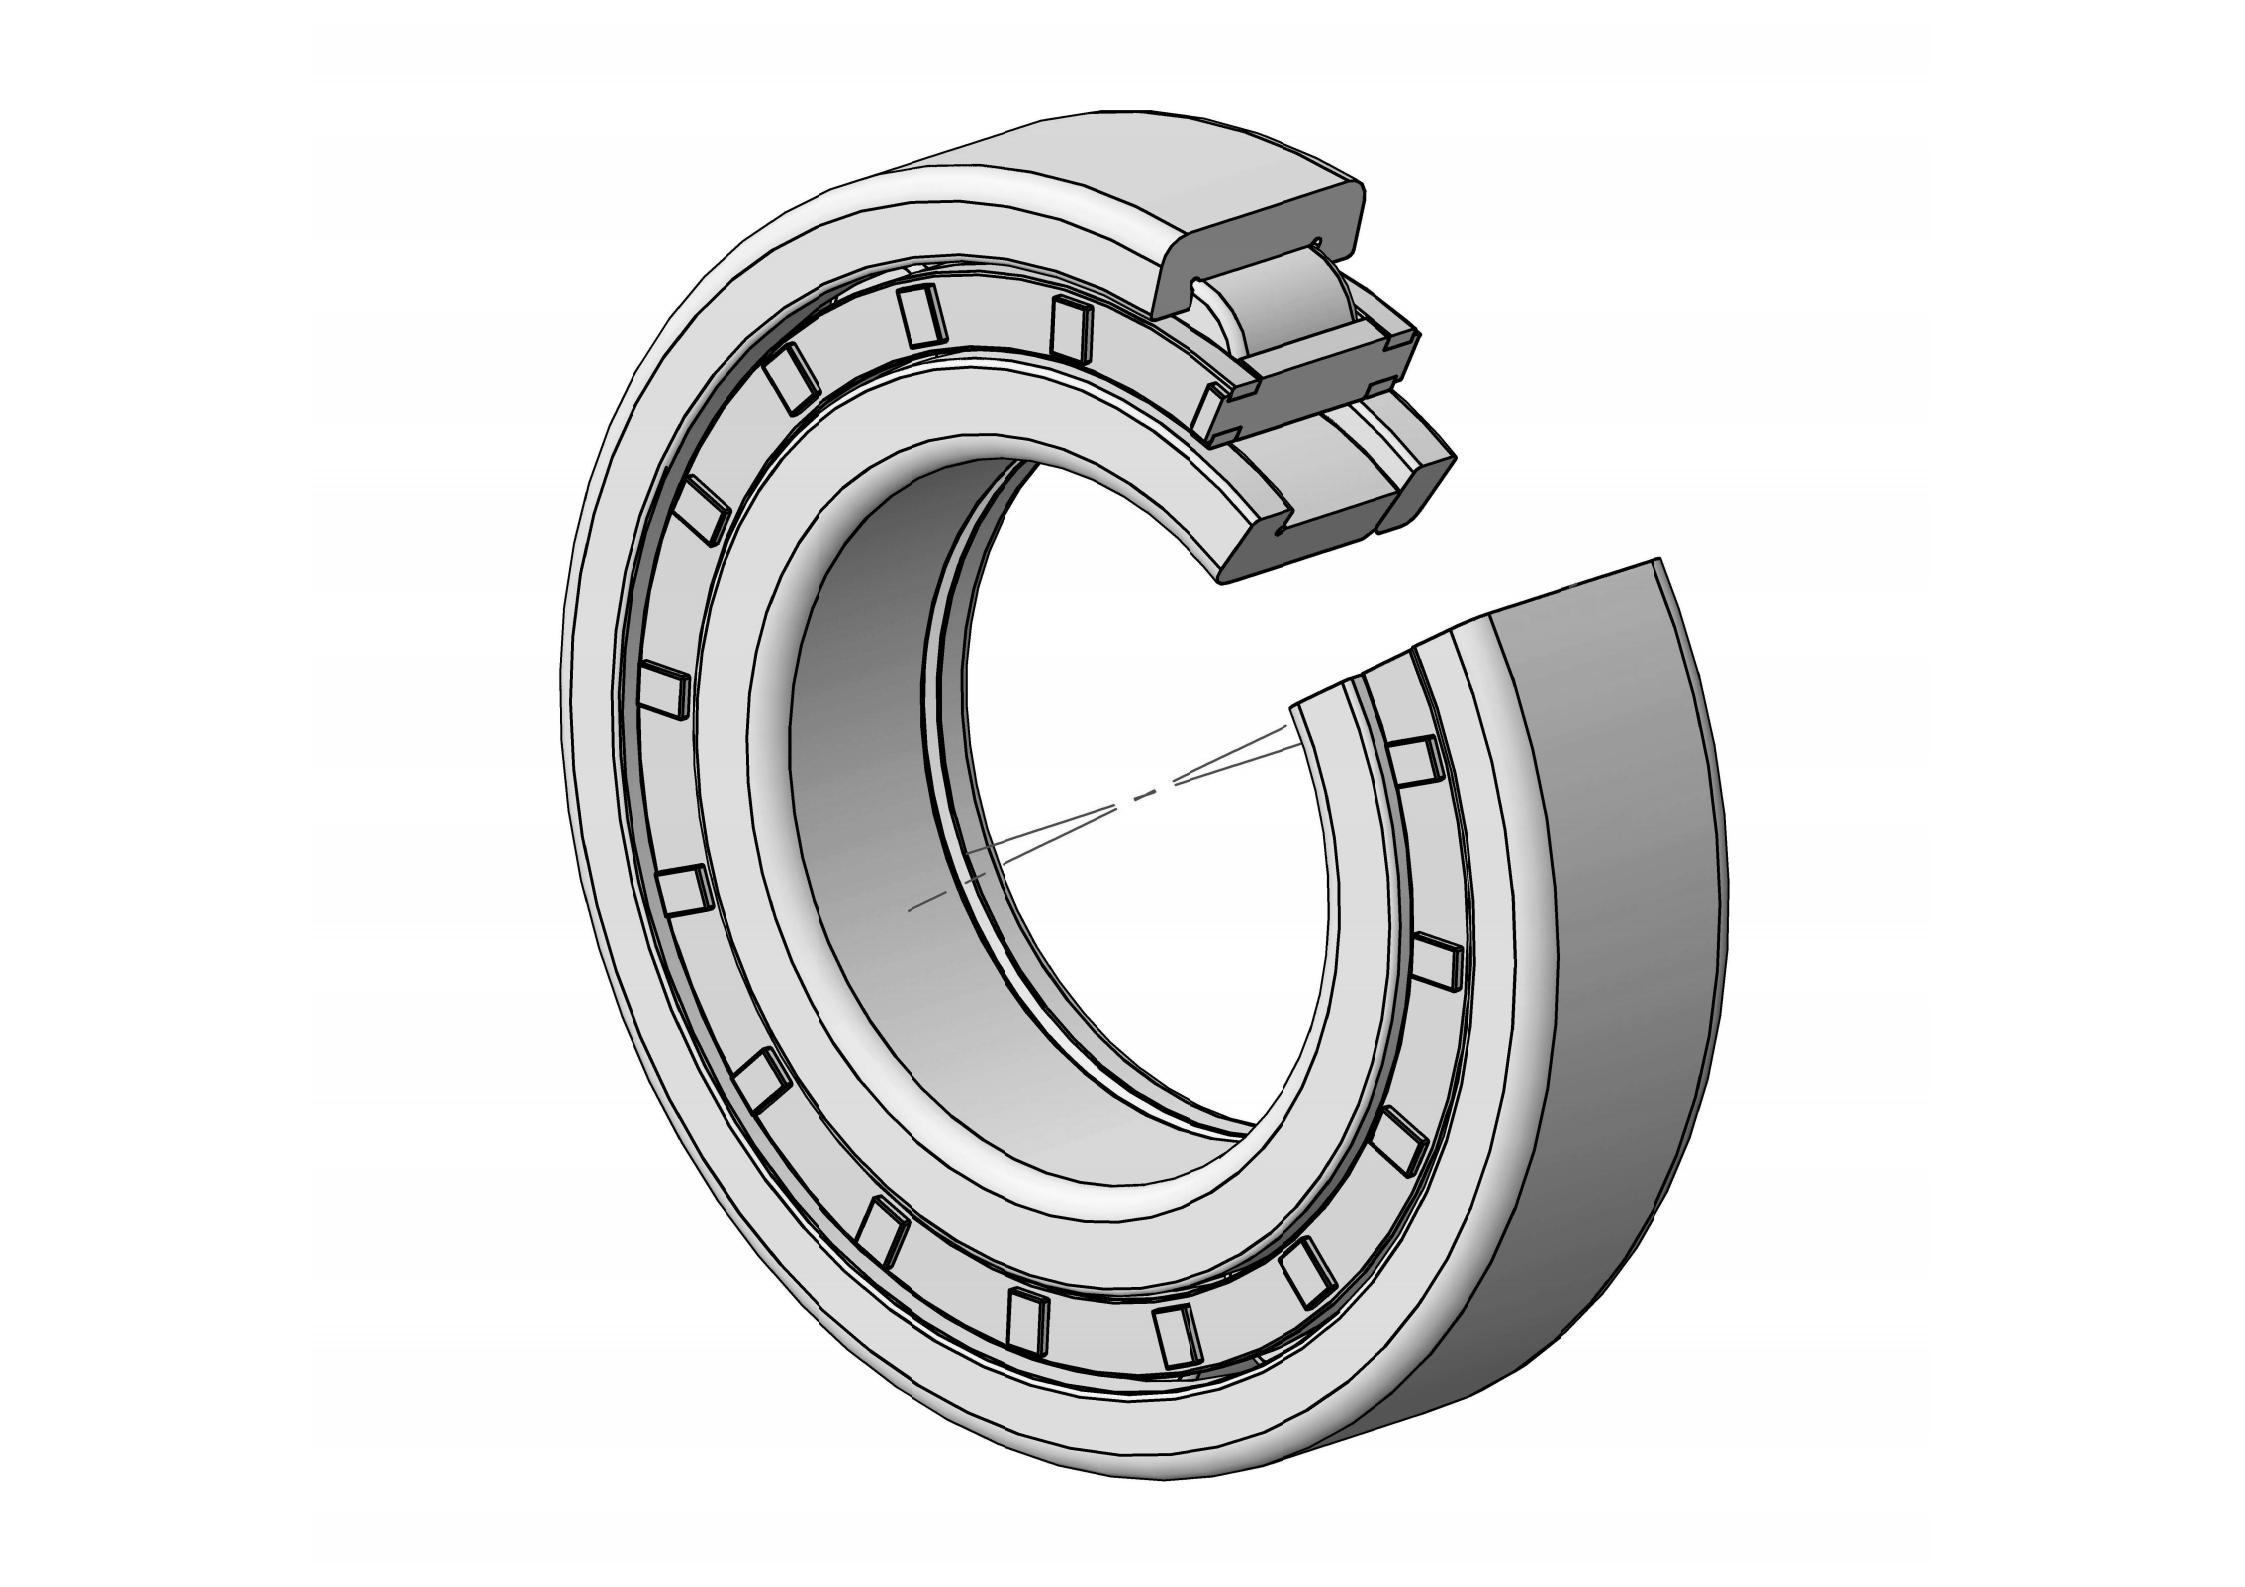 Hot-selling Aligning Bearing - NUP204-E Single Row Cylindrical roller bearing  – CWL